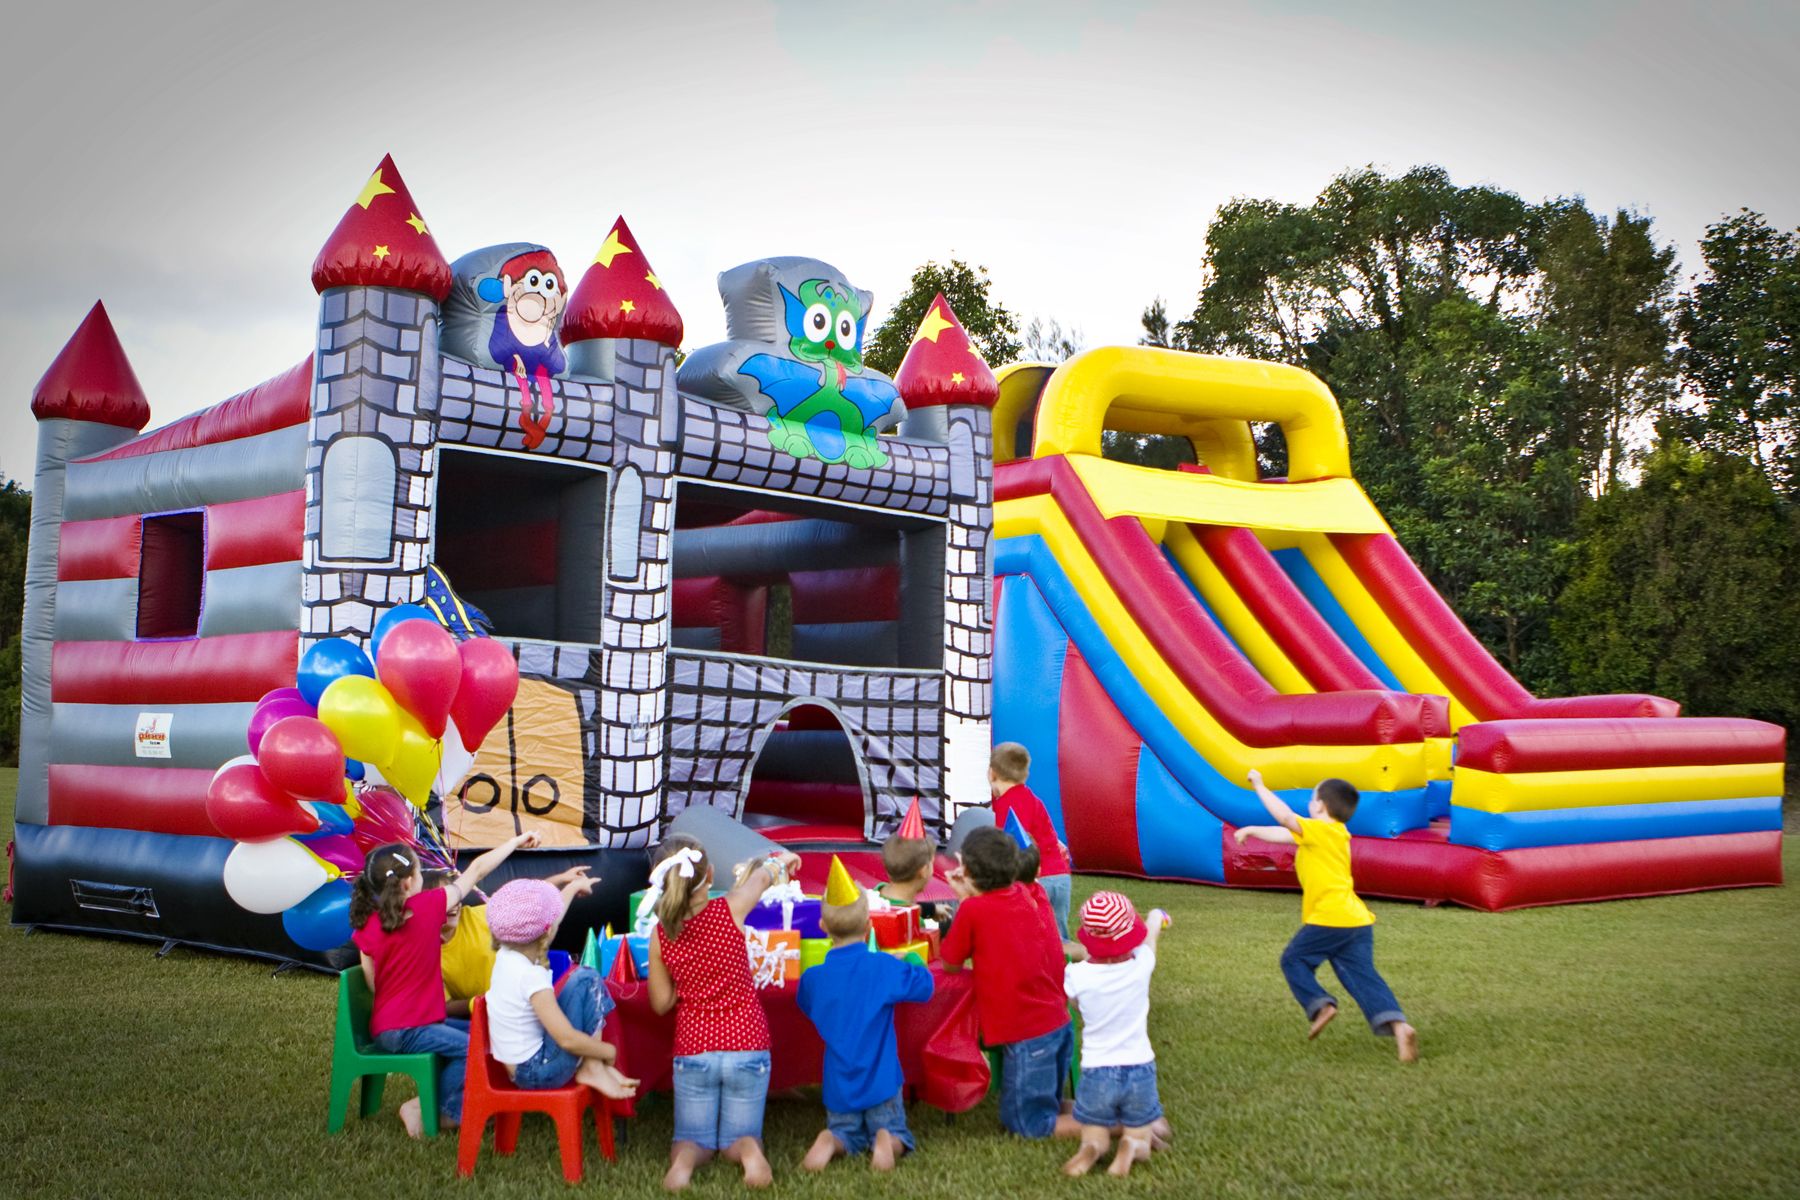 Jumping castle safety concerns on items bought online after Tasmania  tragedy - ABC News